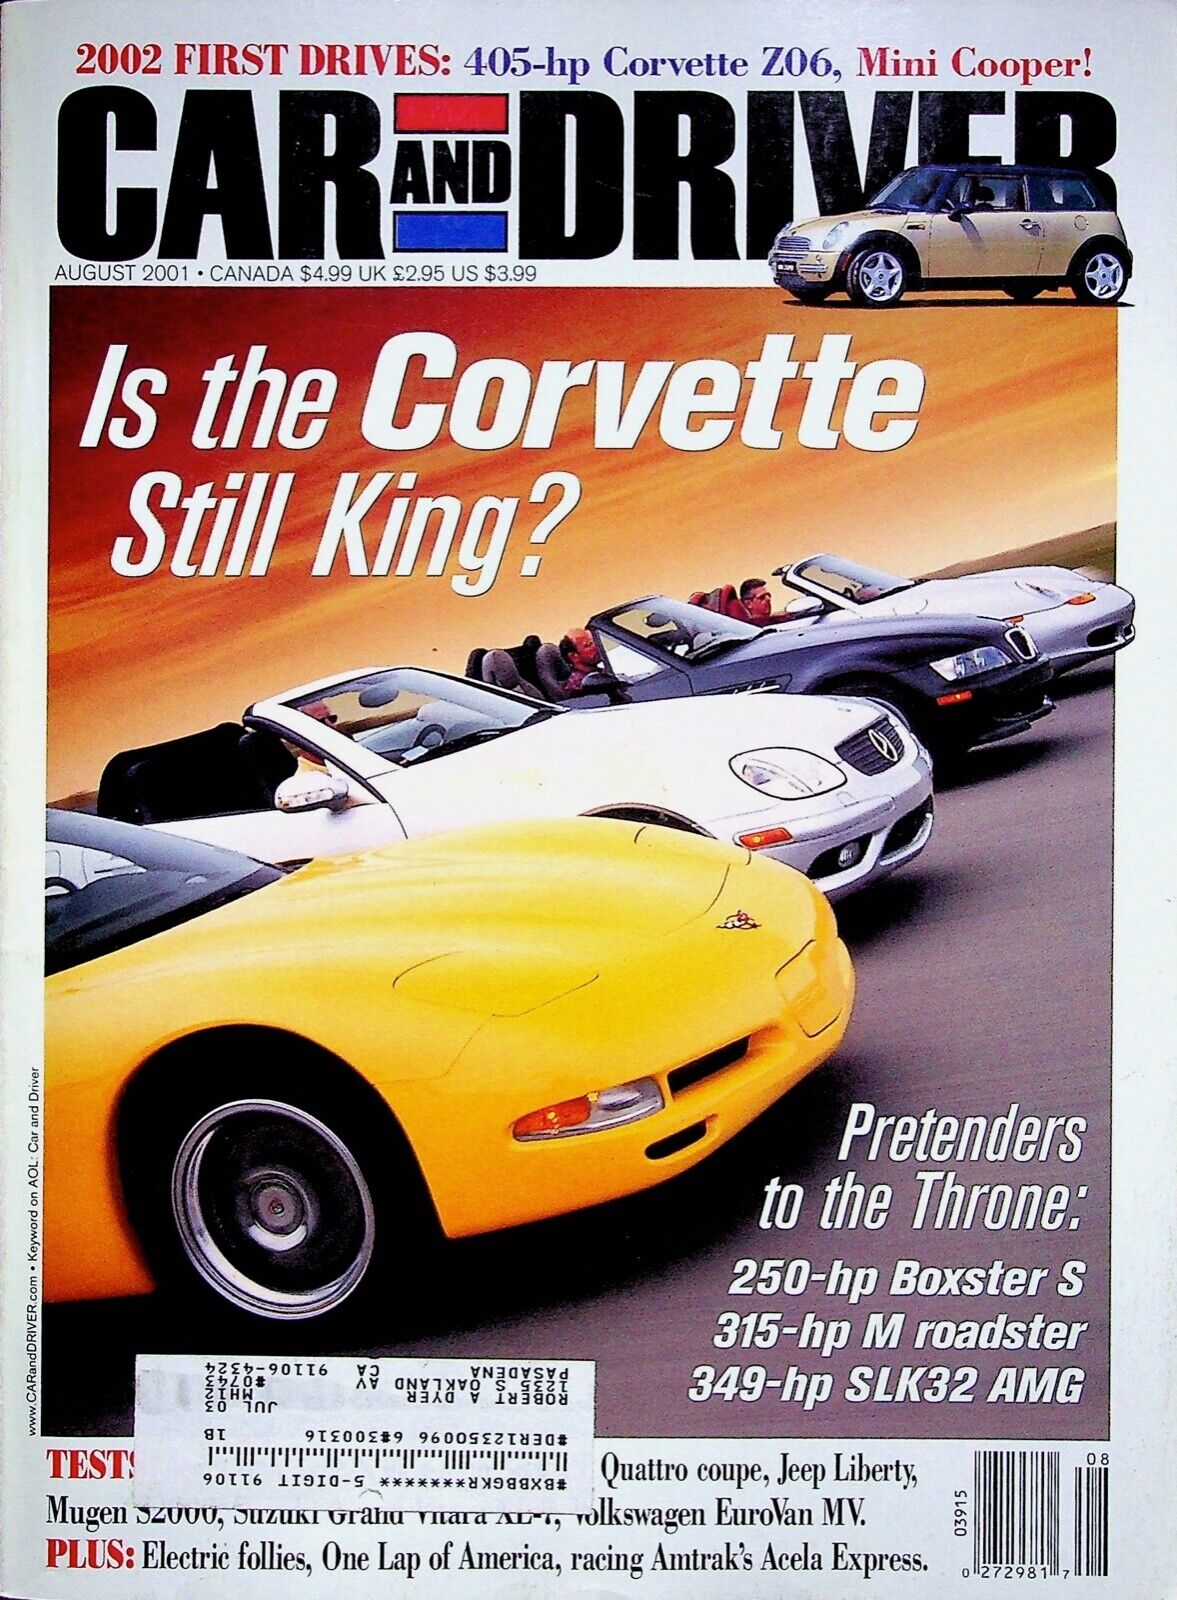 IS THE CORVETTE STILL KING? - CAR AND DRIVER MAGAZINE, AUGUST 2001